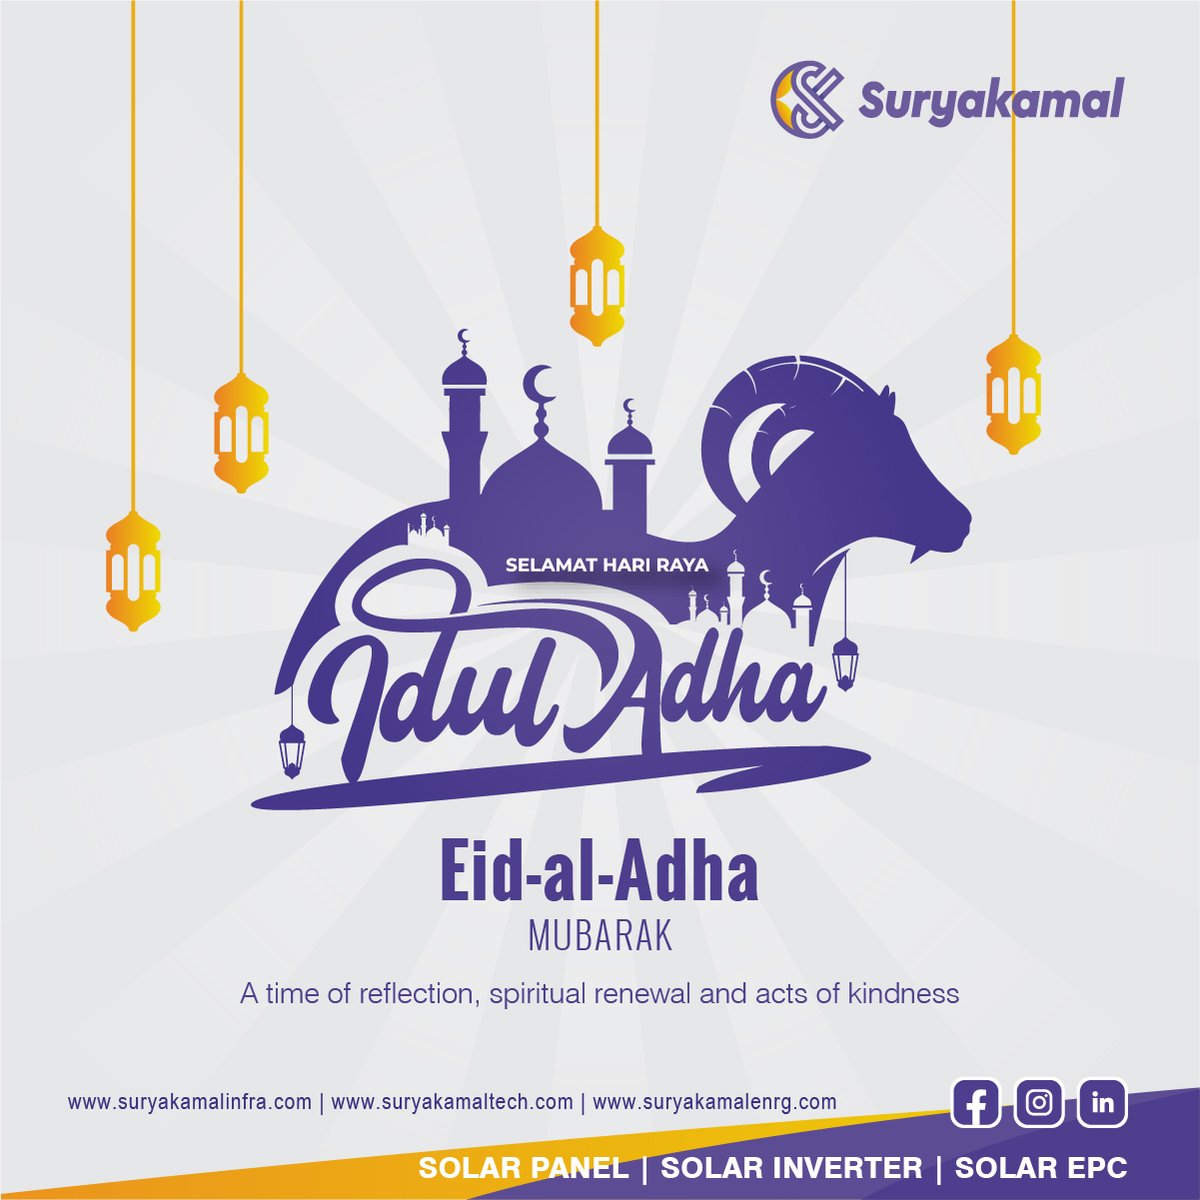 On this sacred day of Eid al-Adha, let's come together in prayer, compassion, and unity. Wishing you a blessed Eid filled with peace and harmony.
#EidAlAdha #PumpUpYourLife #Sacrifice #Generosity #EidMubarak  #festival #indianfestival #solarinnovations #solarenergy #suryakamal